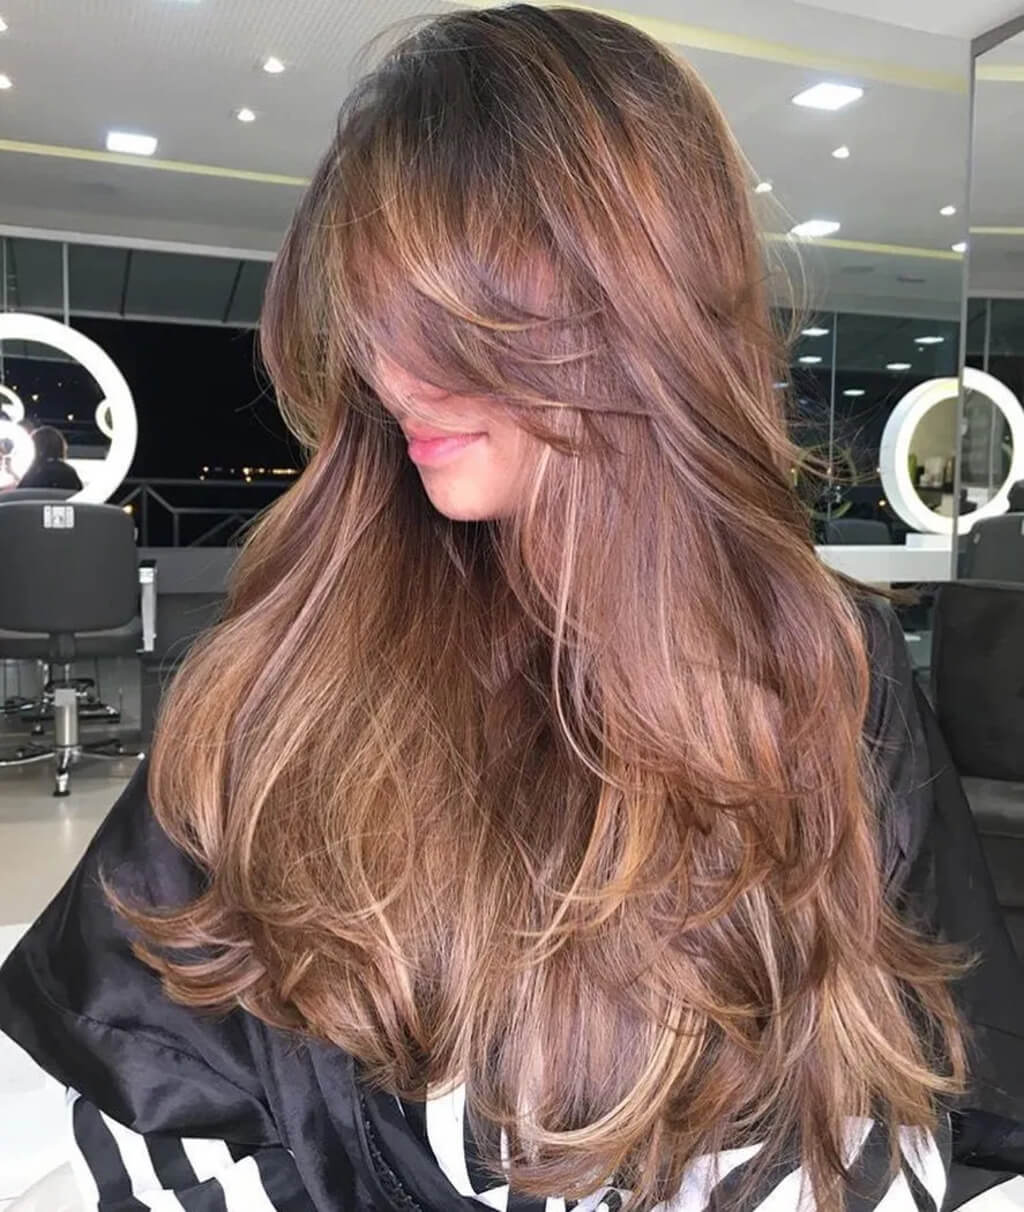 How to style silky long hair with curtain bangs?